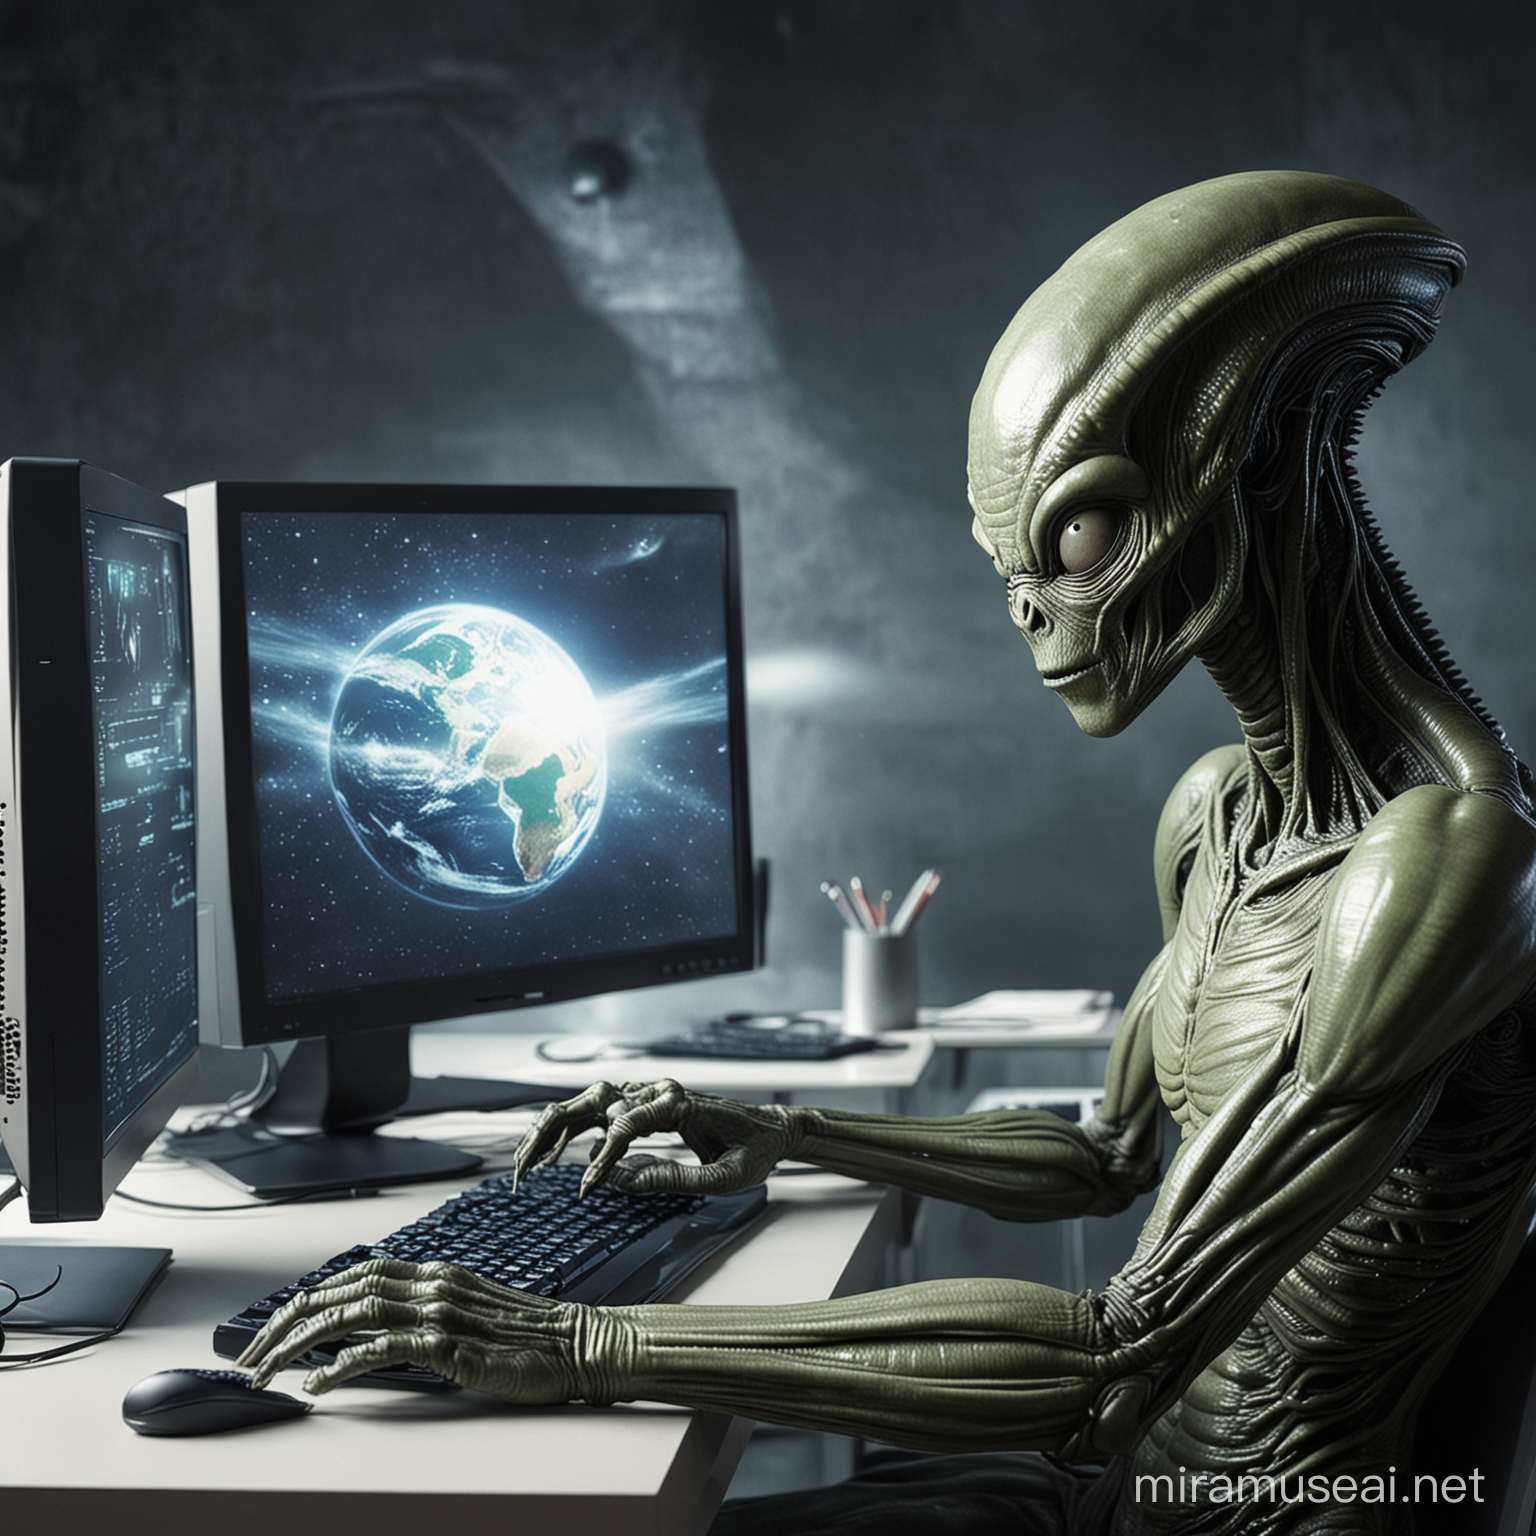 Extraterrestrial Observing Human Creation on Computer Screen